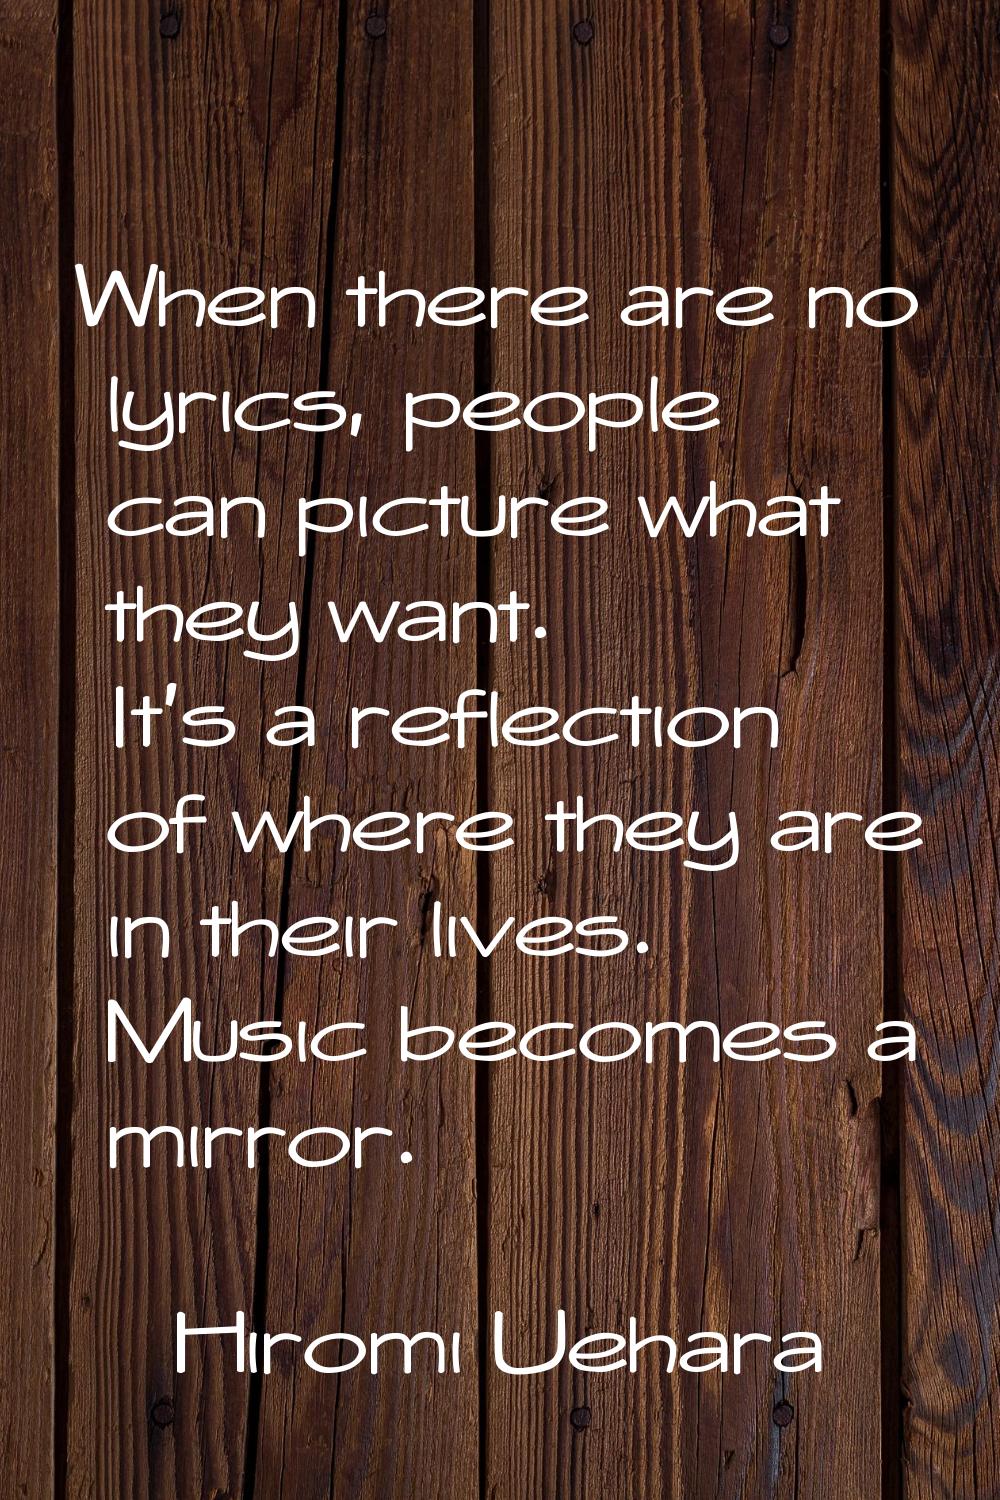 When there are no lyrics, people can picture what they want. It's a reflection of where they are in